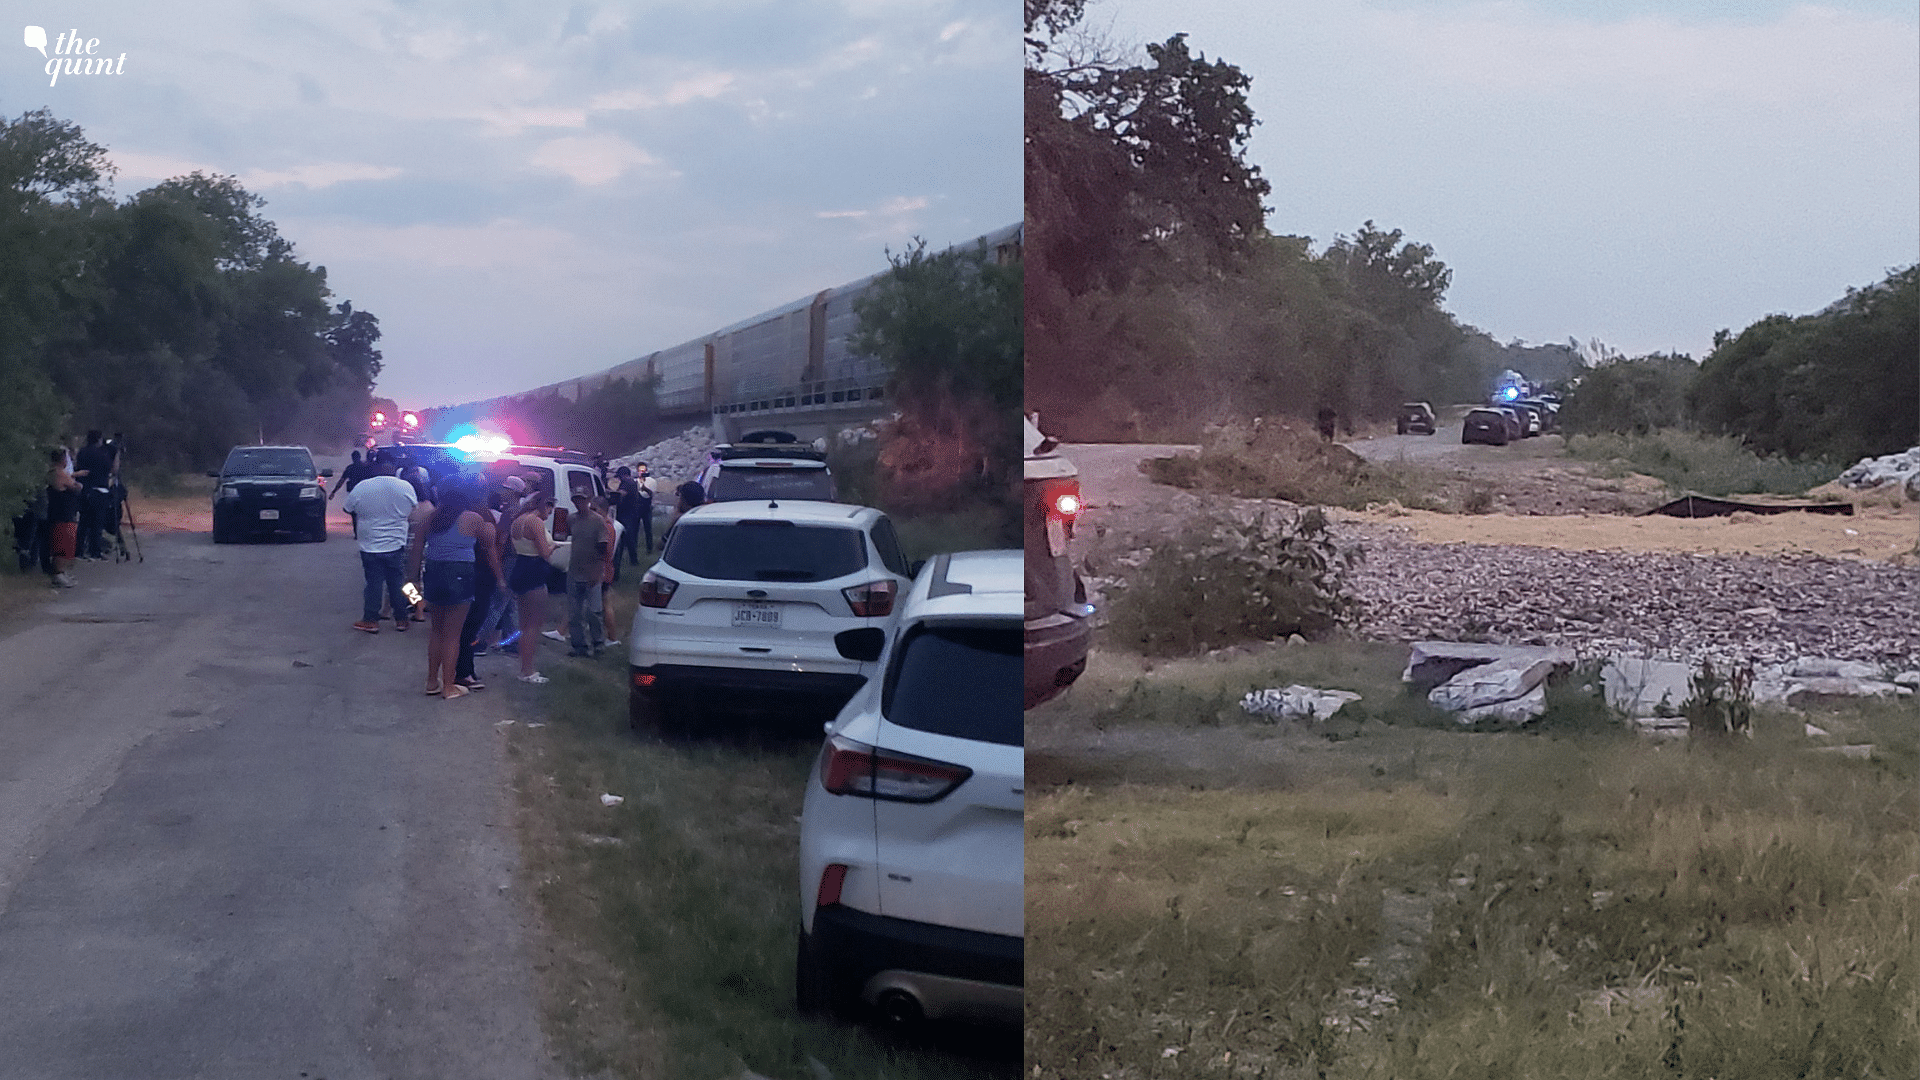 <div class="paragraphs"><p>At least 46 people, in a presumed migrant smuggling attempt, were found dead inside a tractor-trailer in San Antonio, Texas.</p></div>